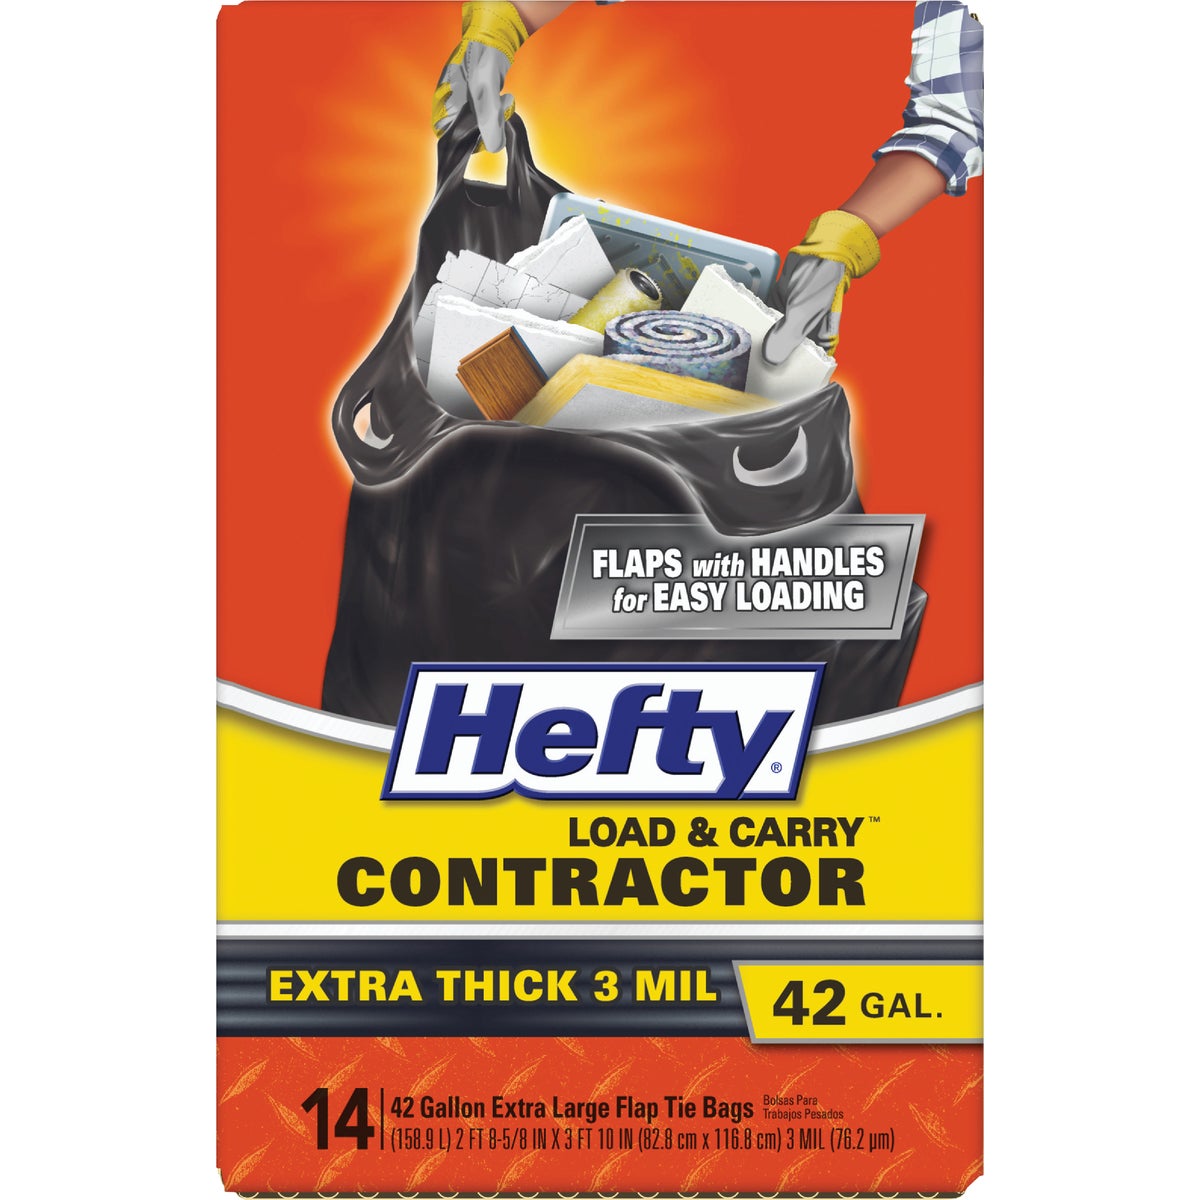 Hefty 42 Gal. Load & Carry Contractor Bags (14 Count)